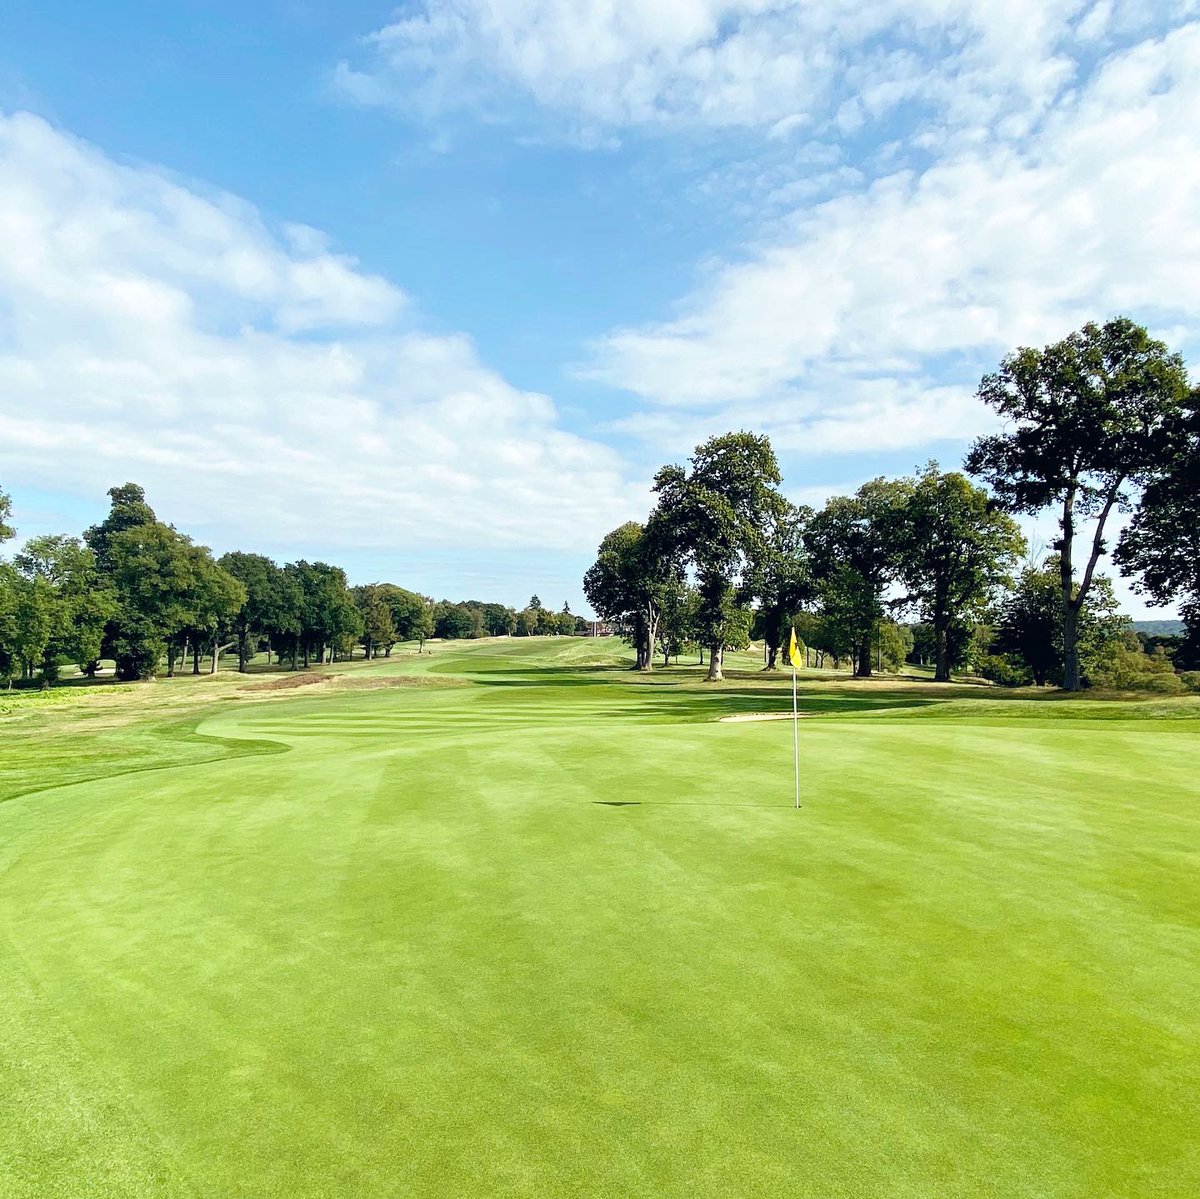 The course is looking good in the lead up to autumn meeting and club championships. Good luck to everyone playing. 

@tandridgegolfclub #golf #surreygolf #tandridgegolfclub #top100golfcourse